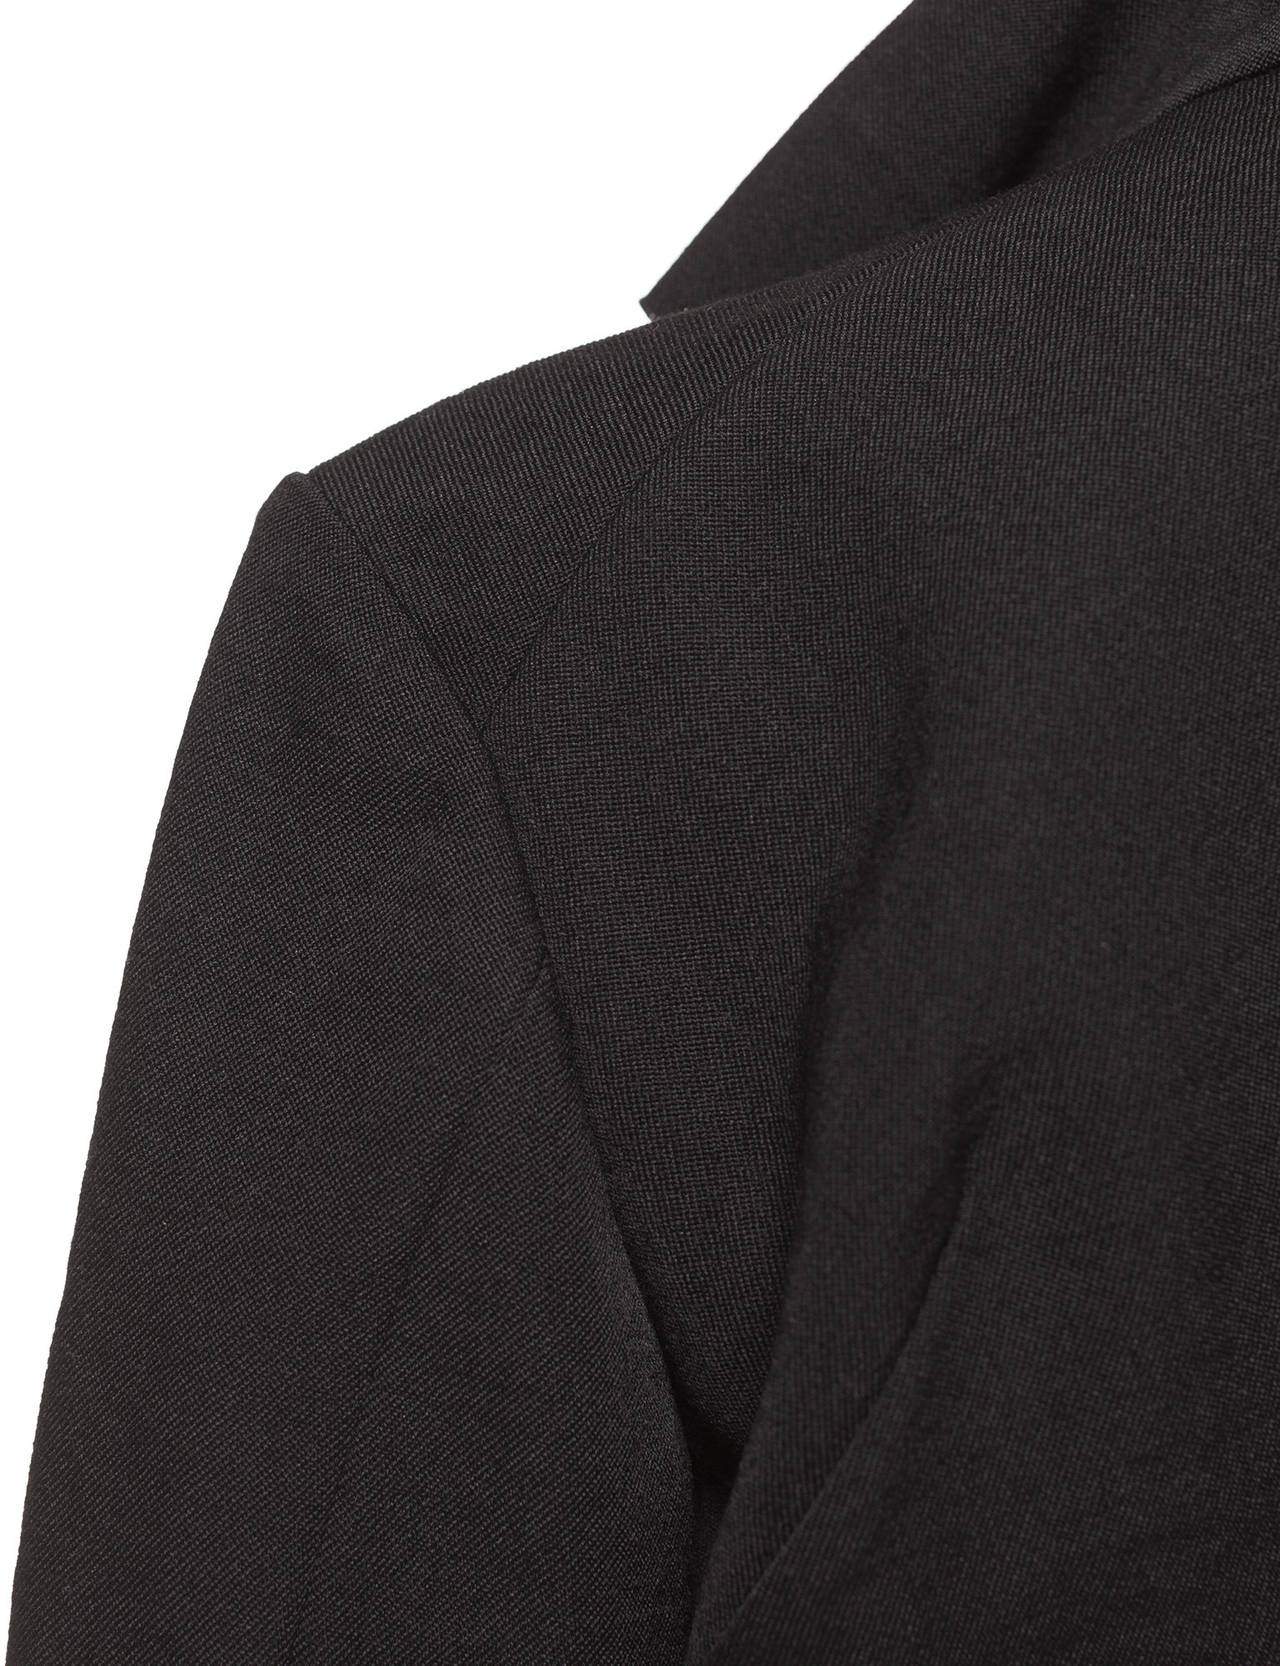 Junya Watanabe Blazer with flap details at back and collar, Sz. M 1